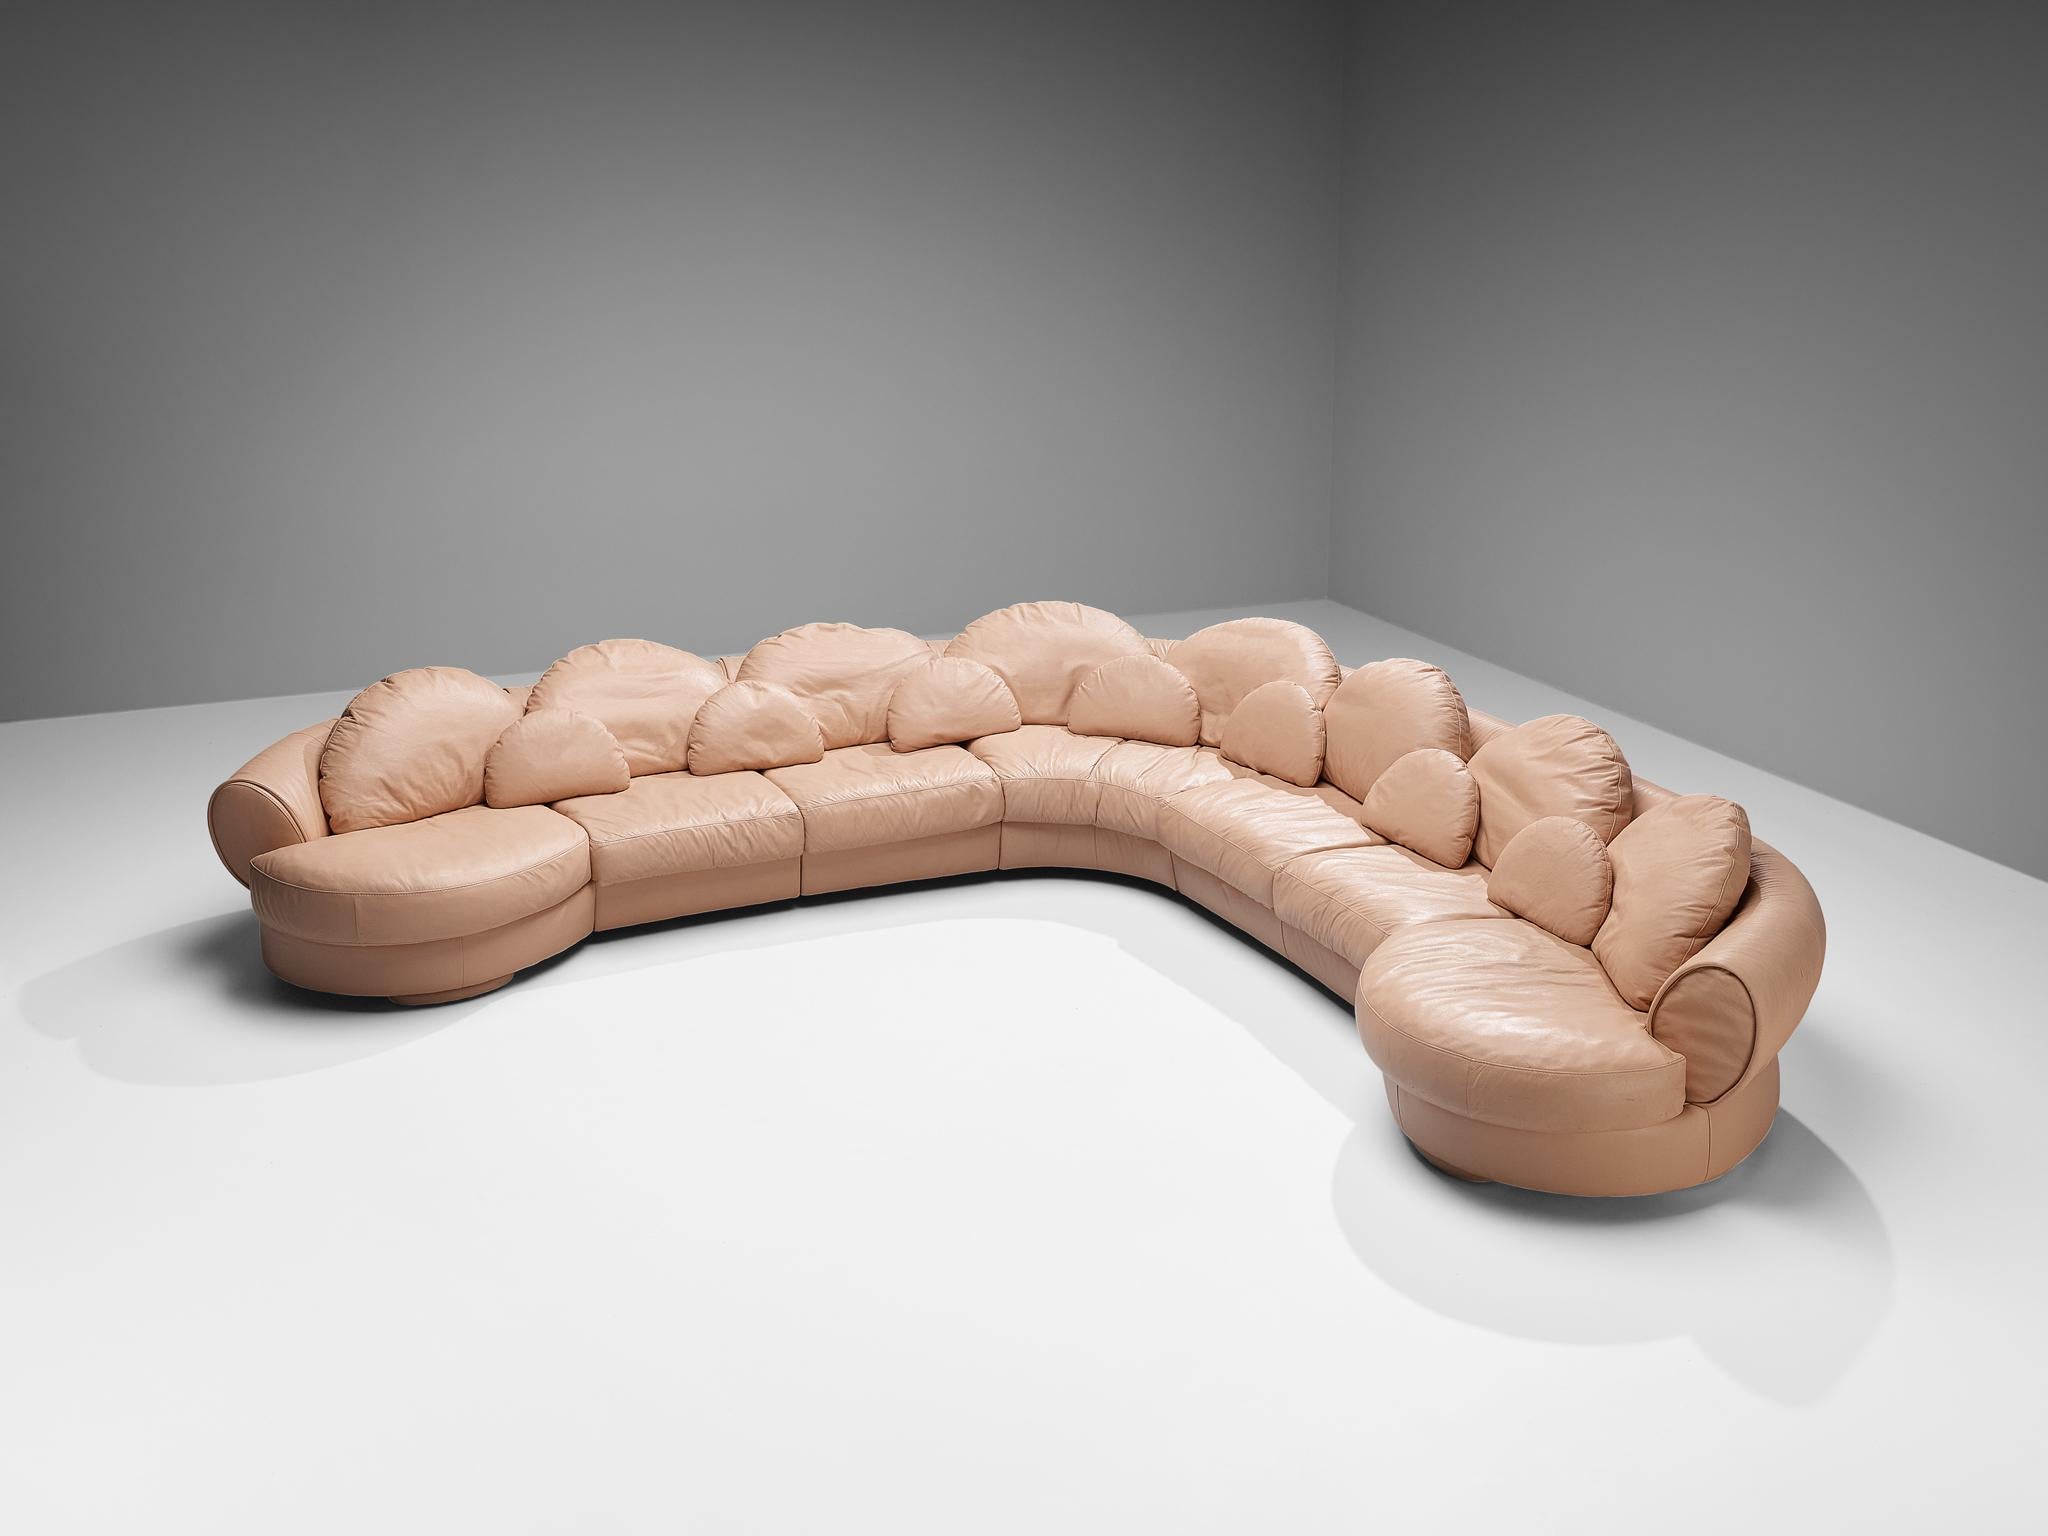 Wiener Werkstätte 'Attributed' Sectional Sofa in Pink Orange Leather  For Sale 8